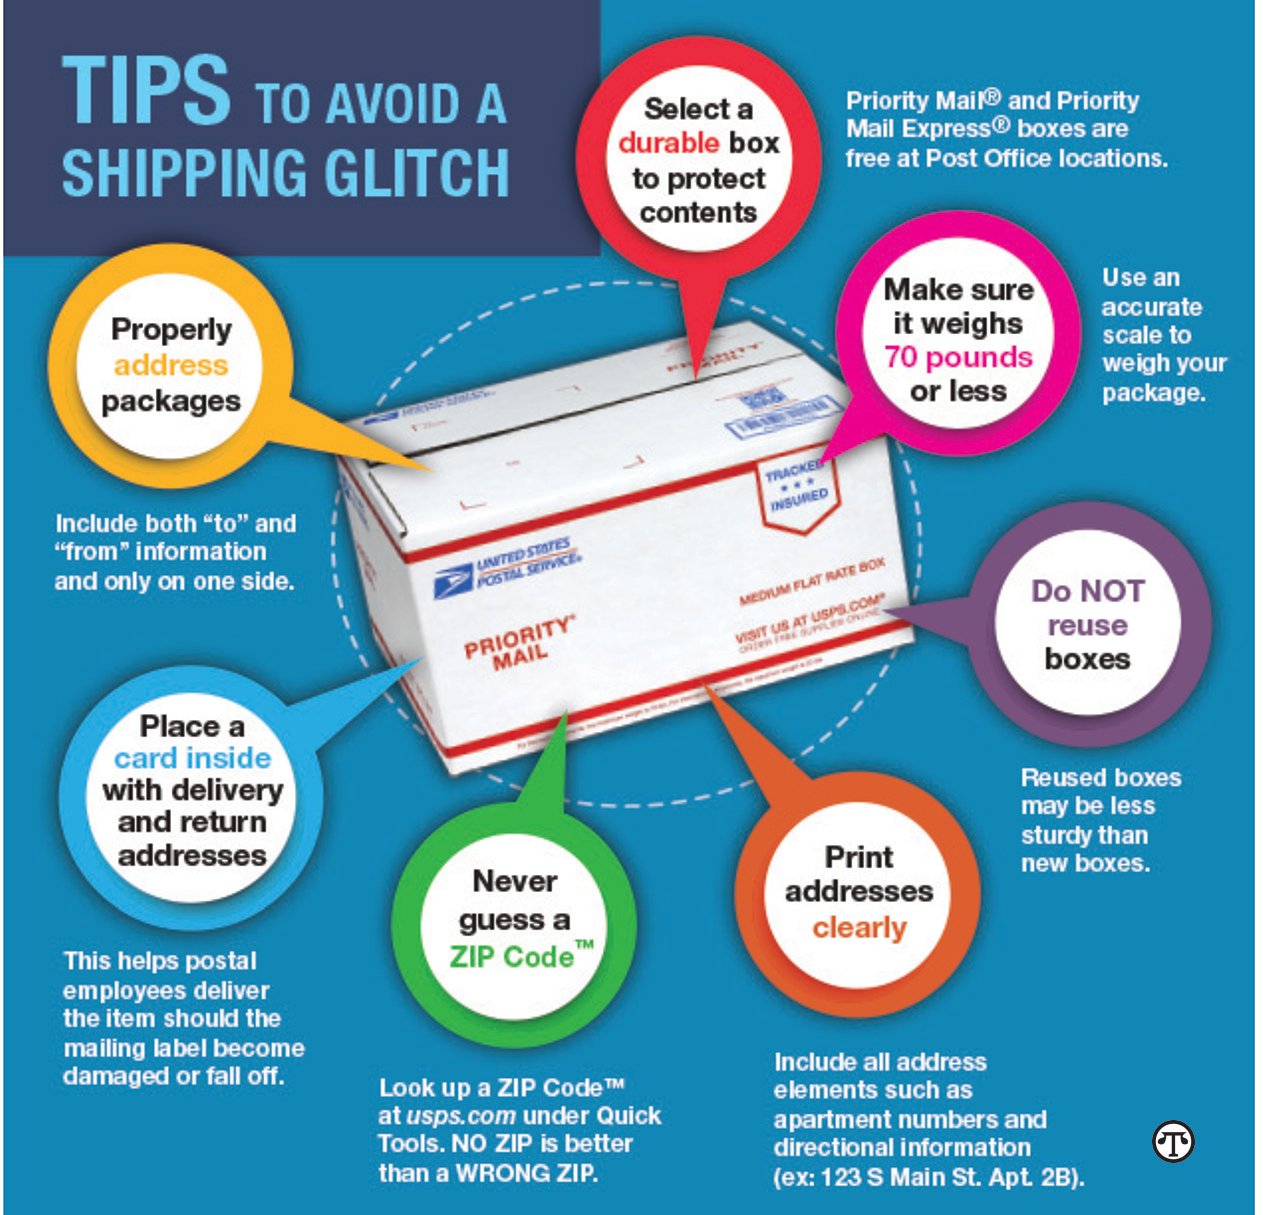 For happier holidays, follow the Post Office guidelines to get all your cards and gifts to friends and on time.